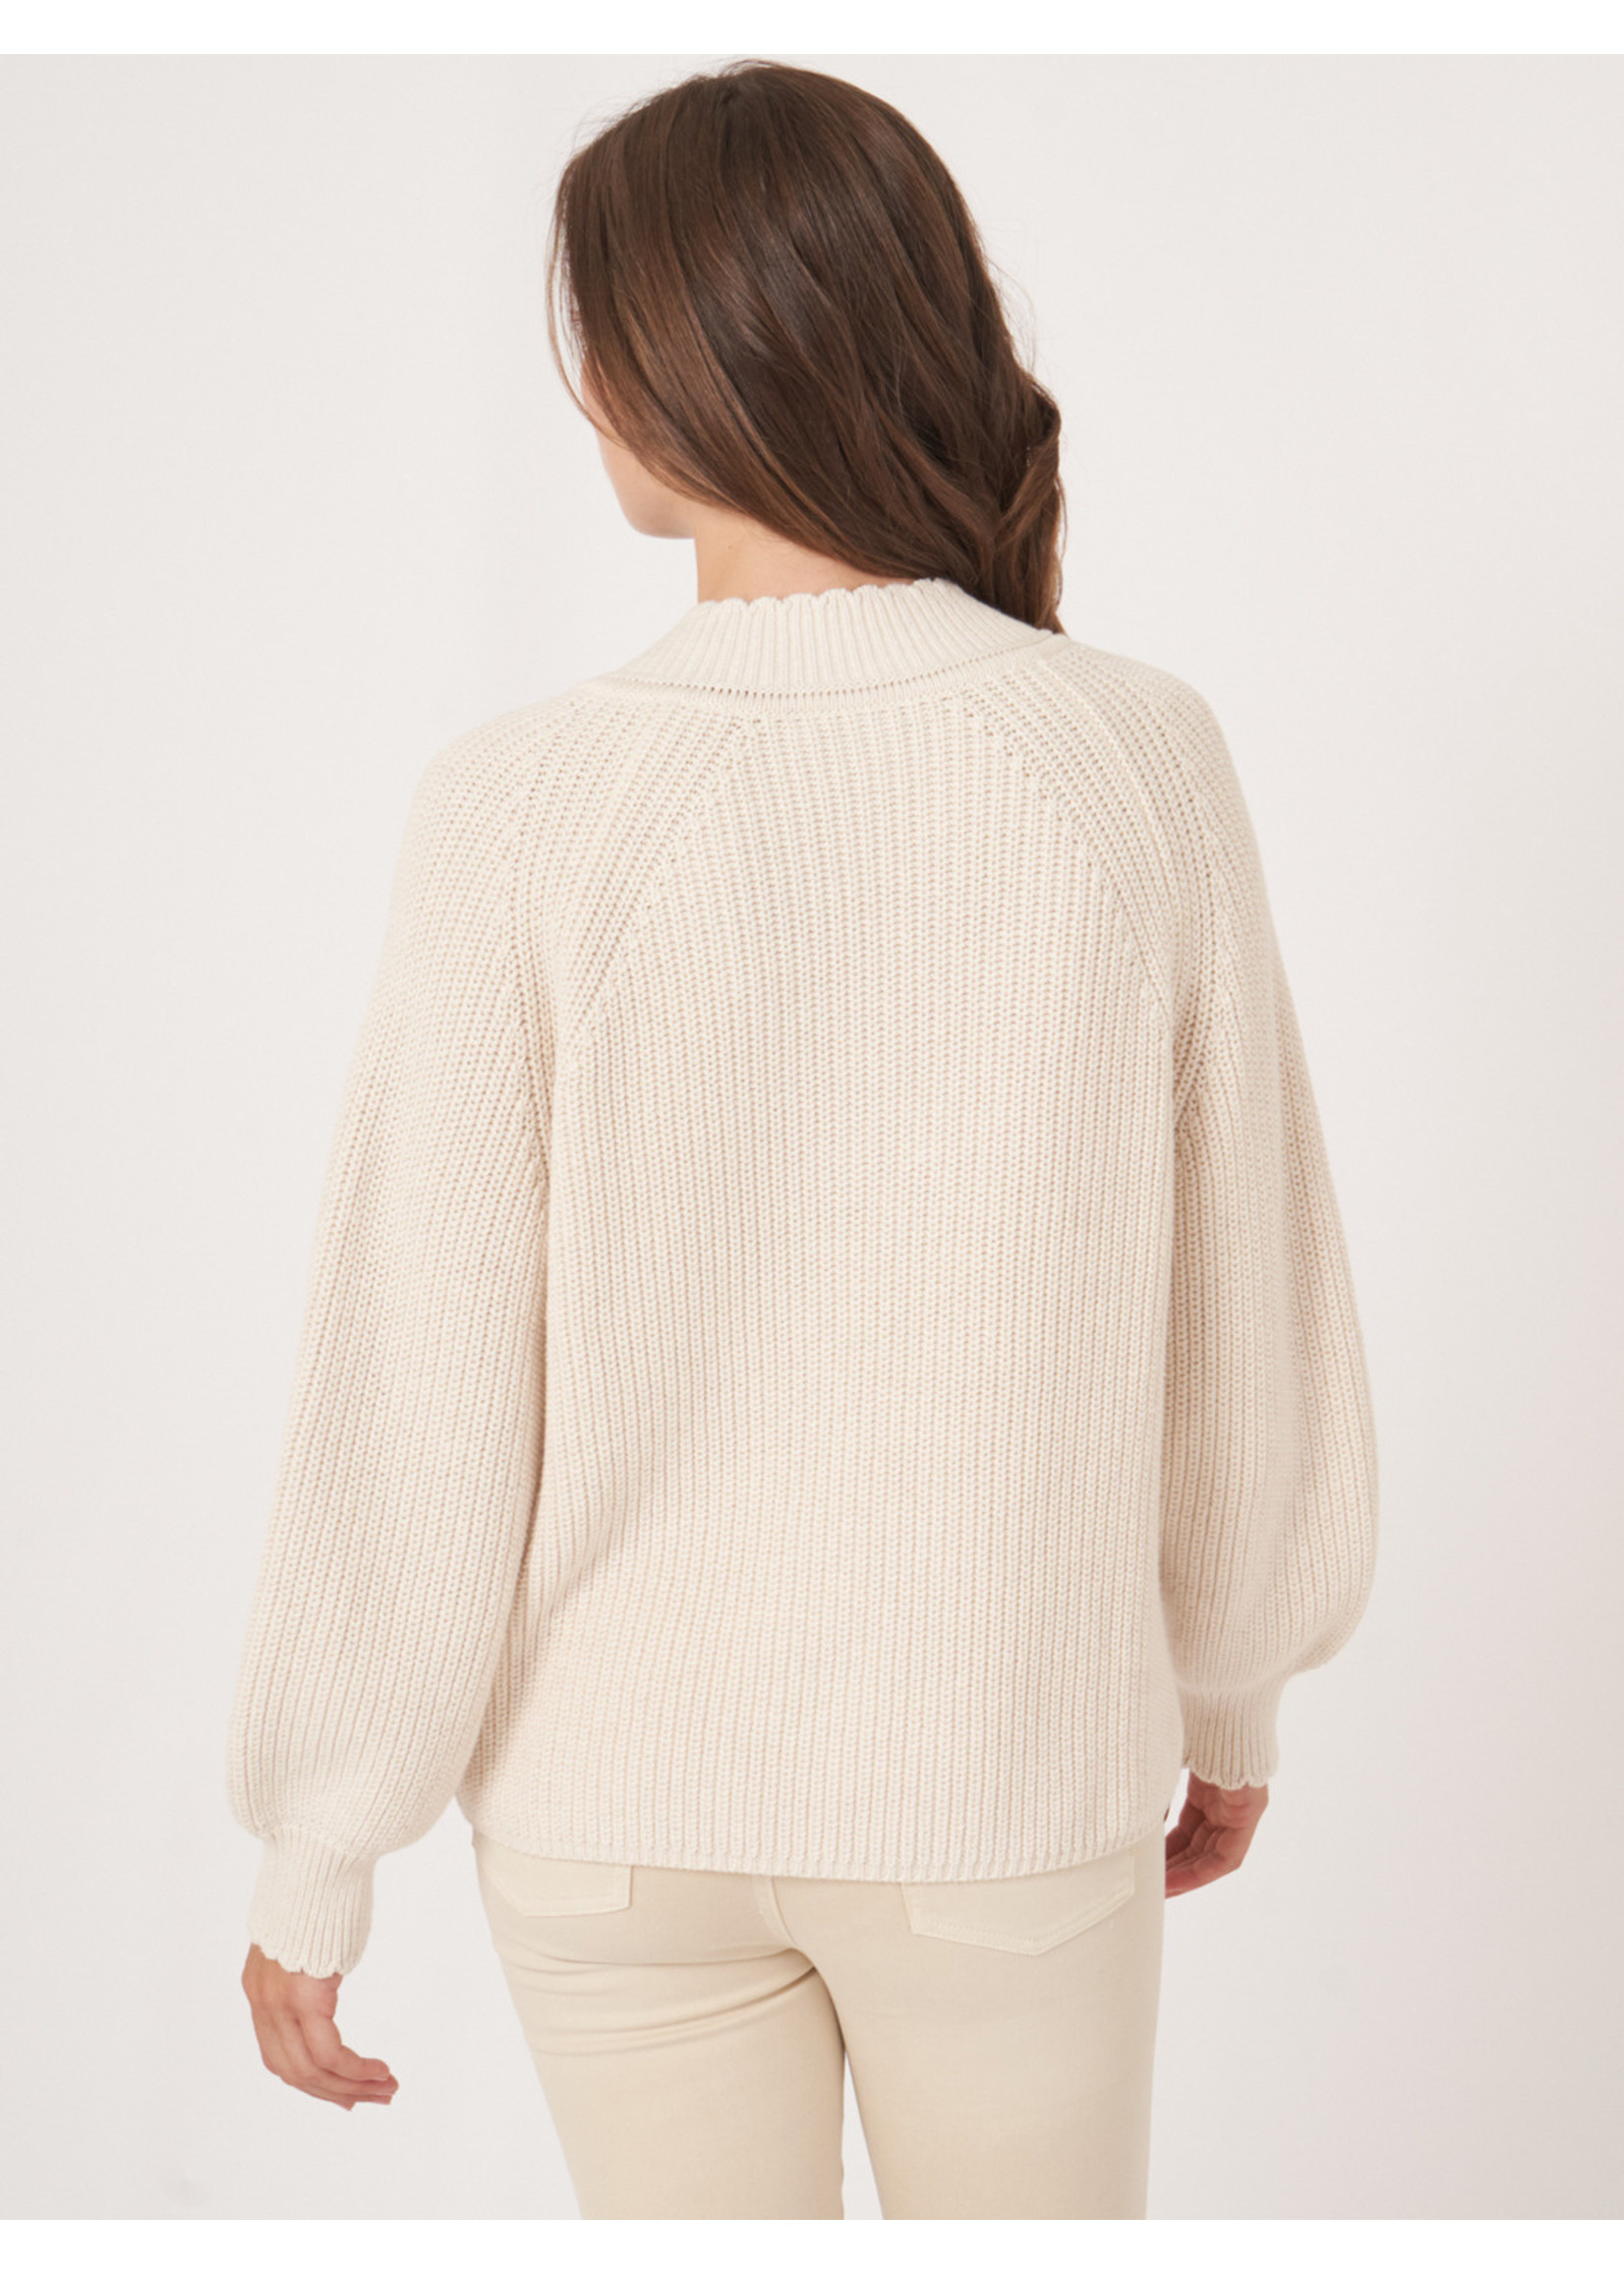 Repeat 400881 KNIT